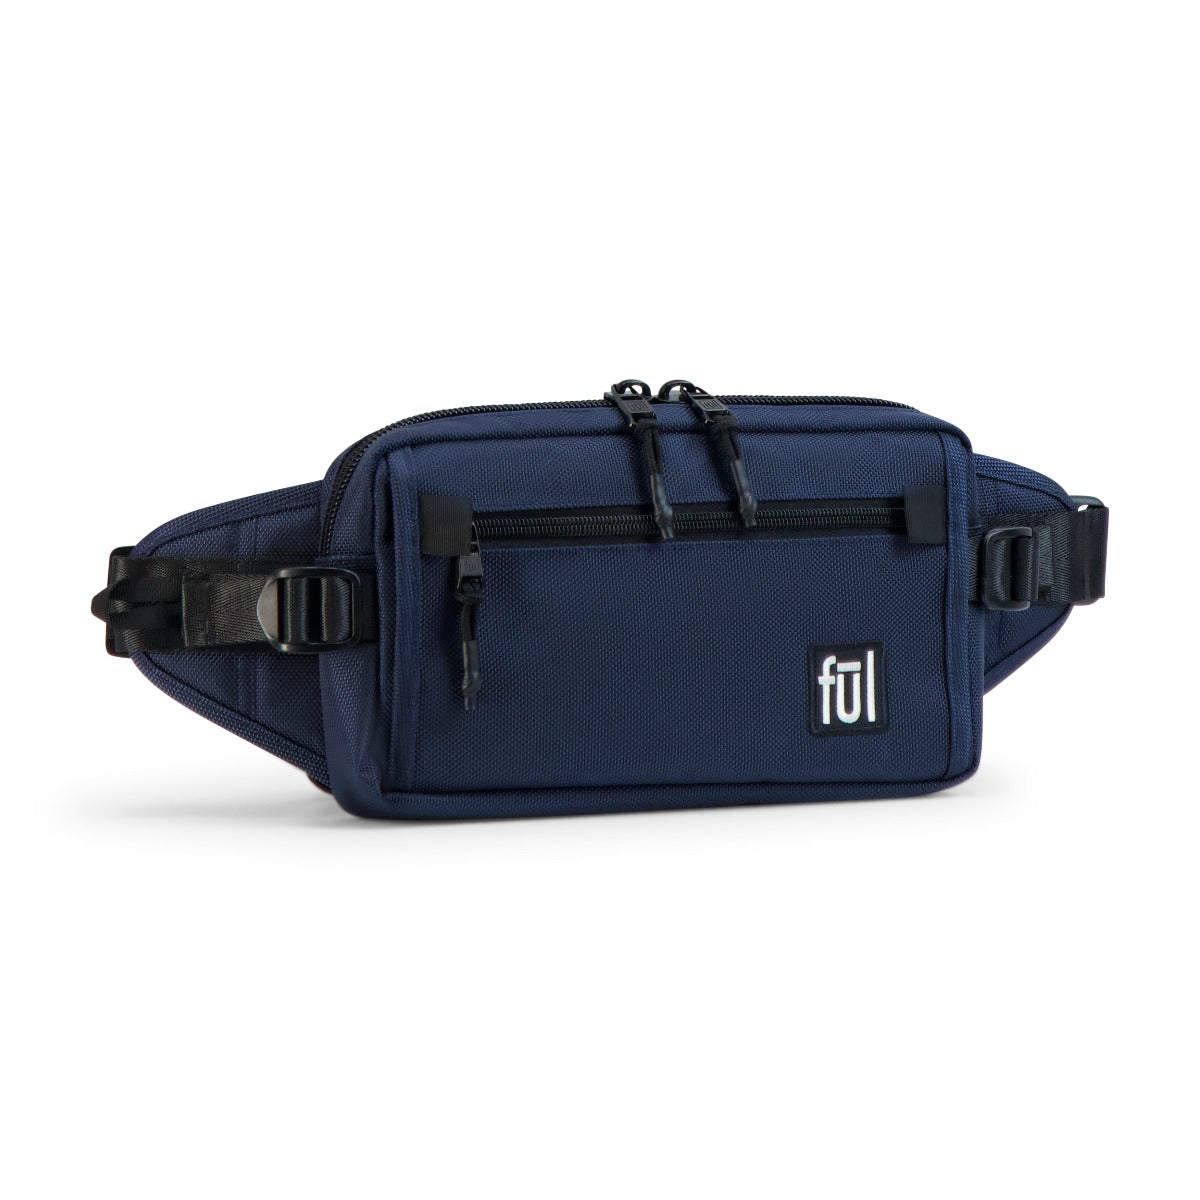 Ful tactics collection scout waistpack navy blue - best everyday fanny packs